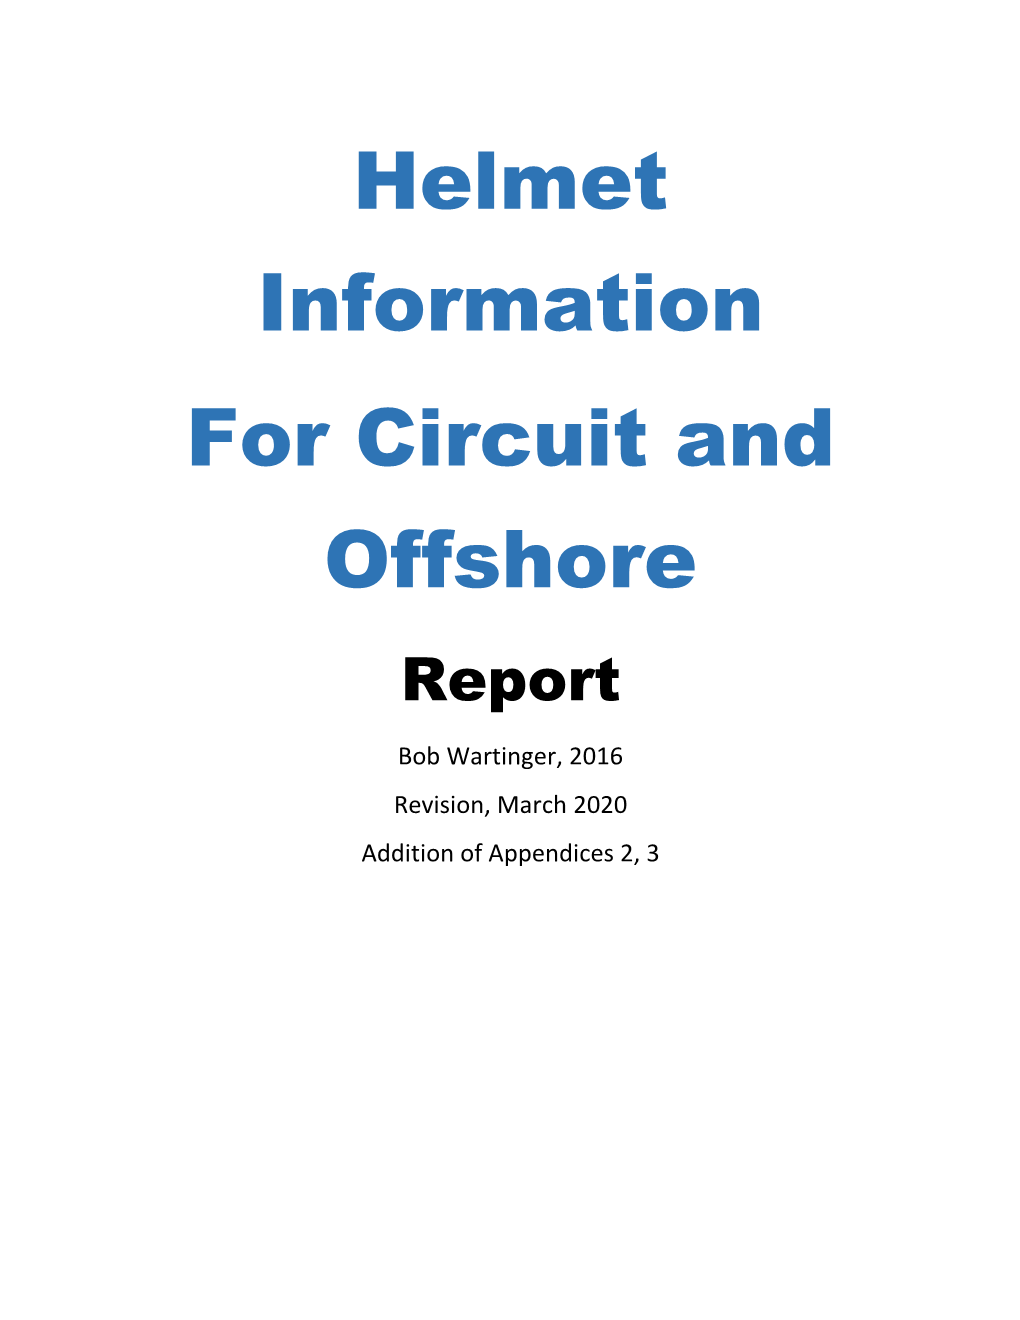 Helmet Information for Circuit and Offshore Report Bob Wartinger, 2016 Revision, March 2020 Addition of Appendices 2, 3